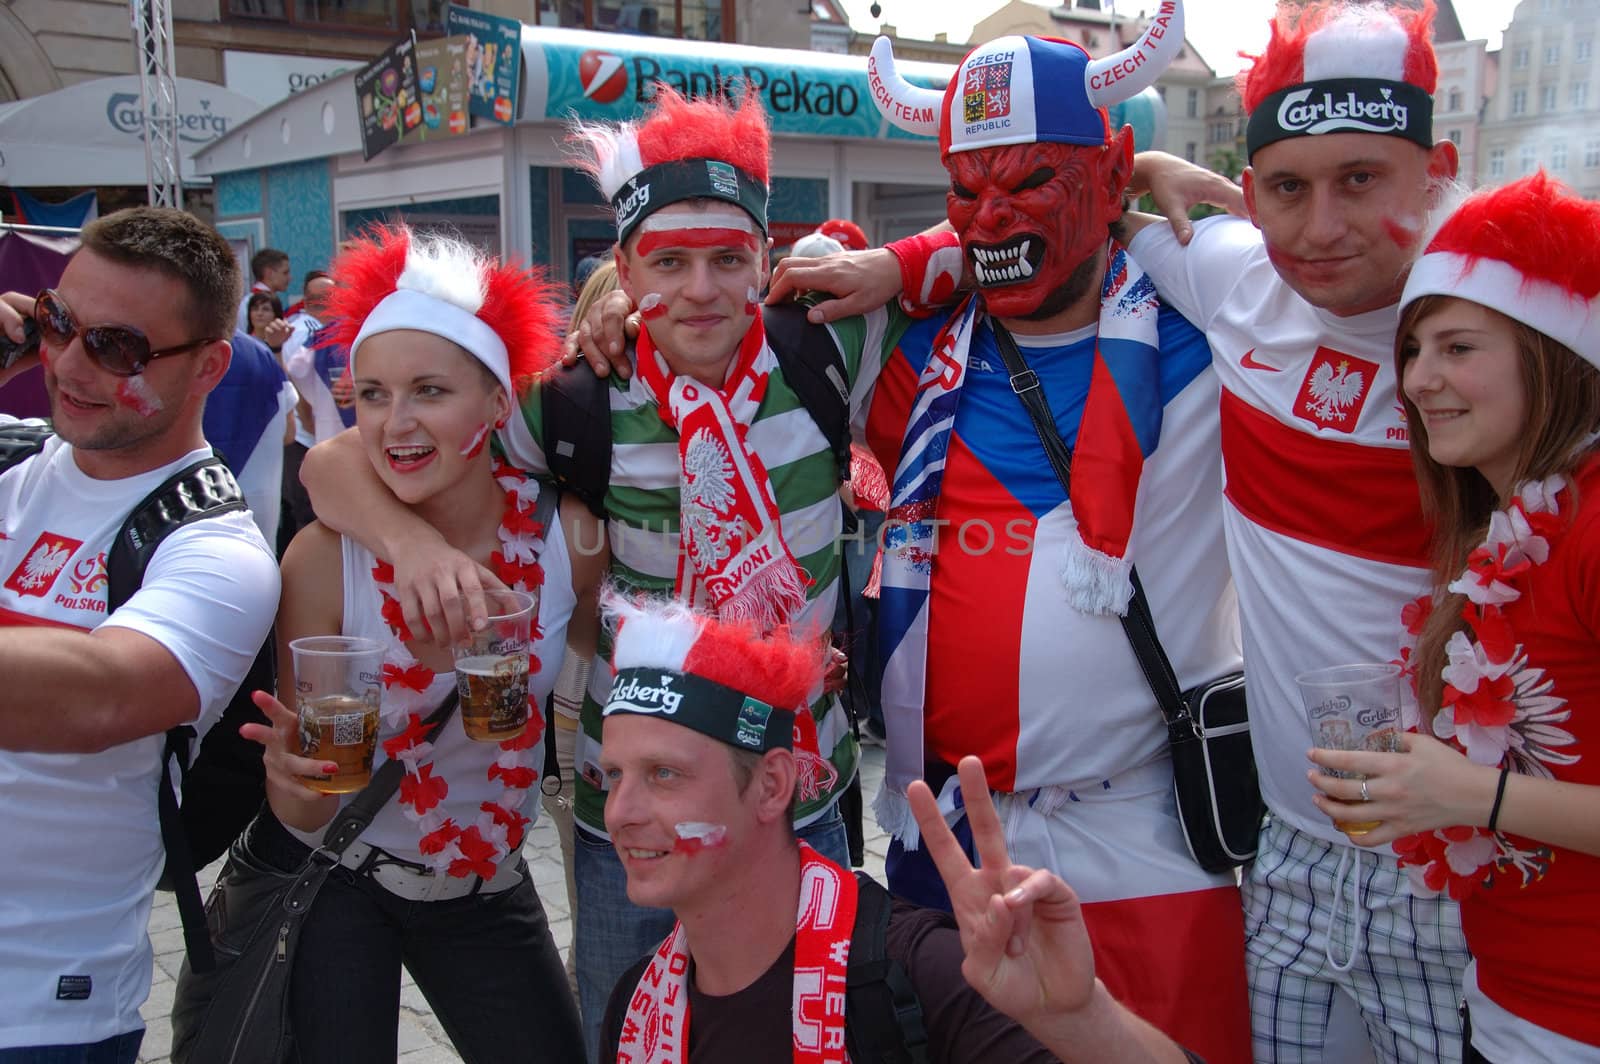 WROCLAW, POLAND - JUNE 8: UEFA Euro 2012, fanzone in Wroclaw. Polish and Czech group of fans on June 8, 2012.